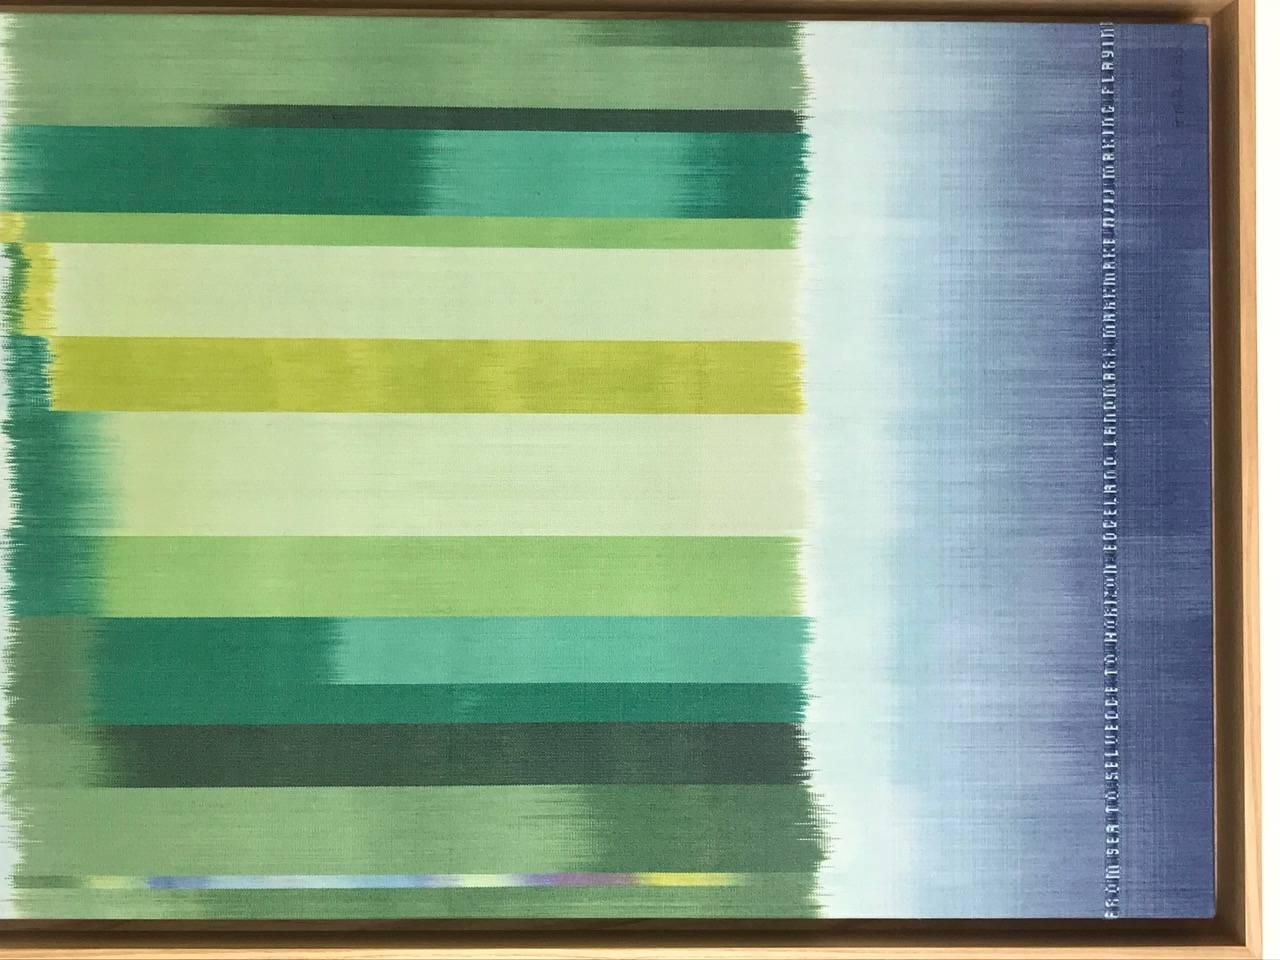 This work at first may appear a painting but is in fact a work of extraordinary skill consisting of a ‘canvas’ made of fine silk, the threads of which the artist has dyed and woven by hand on a 24 inch loom, thereby embedding colour and weaving it